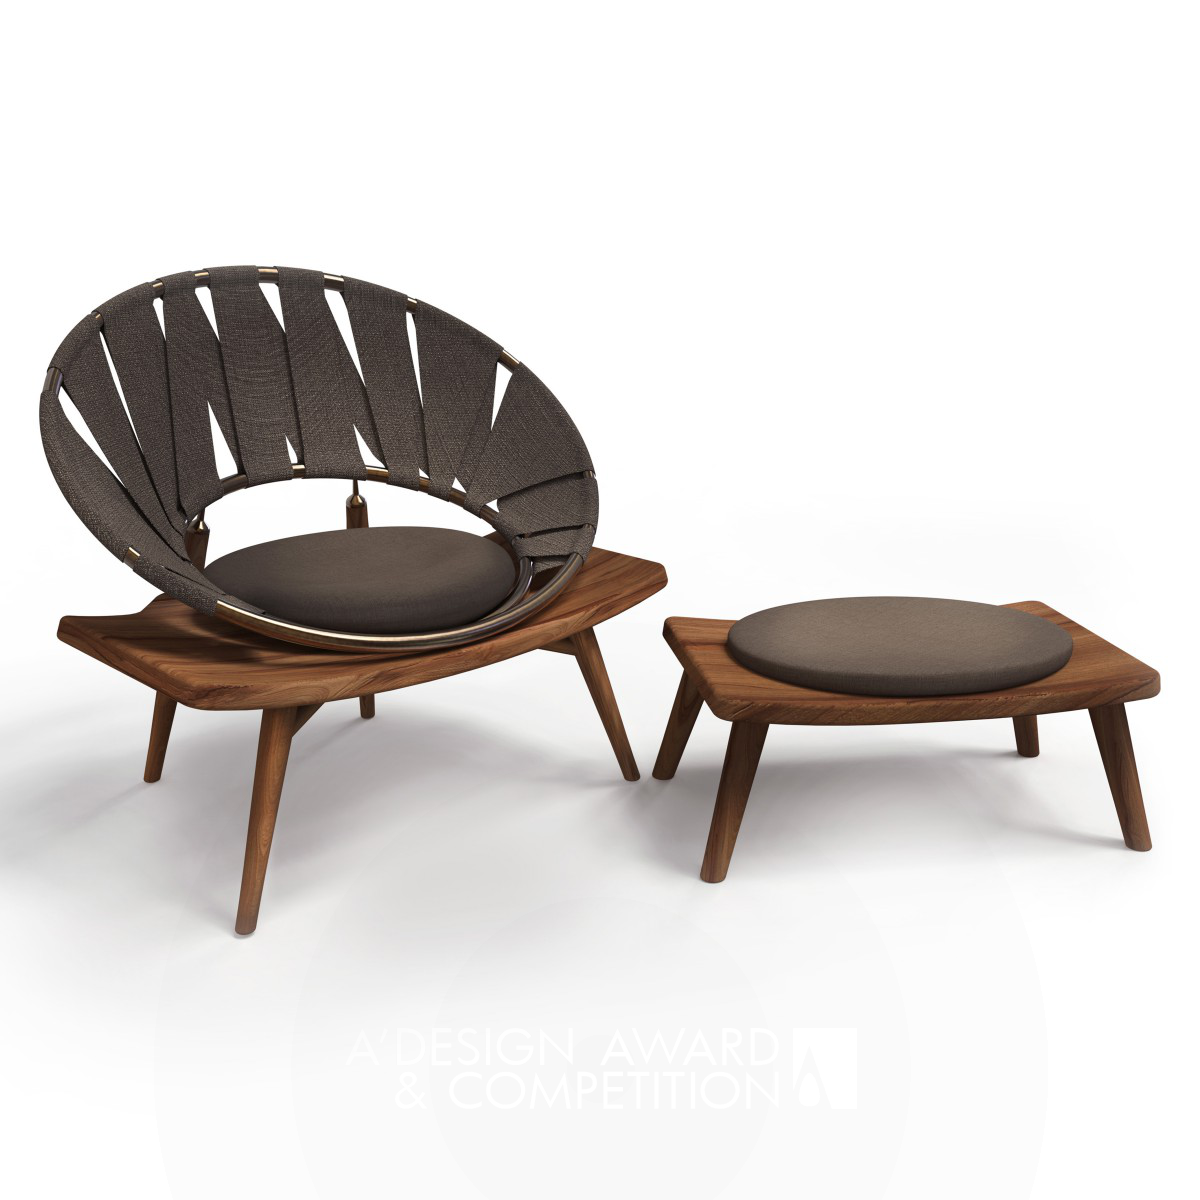 Ring Chair Novelty and Comfortable by Wei Jingye and Sun Kezhao Bronze Furniture Design Award Winner 2020 